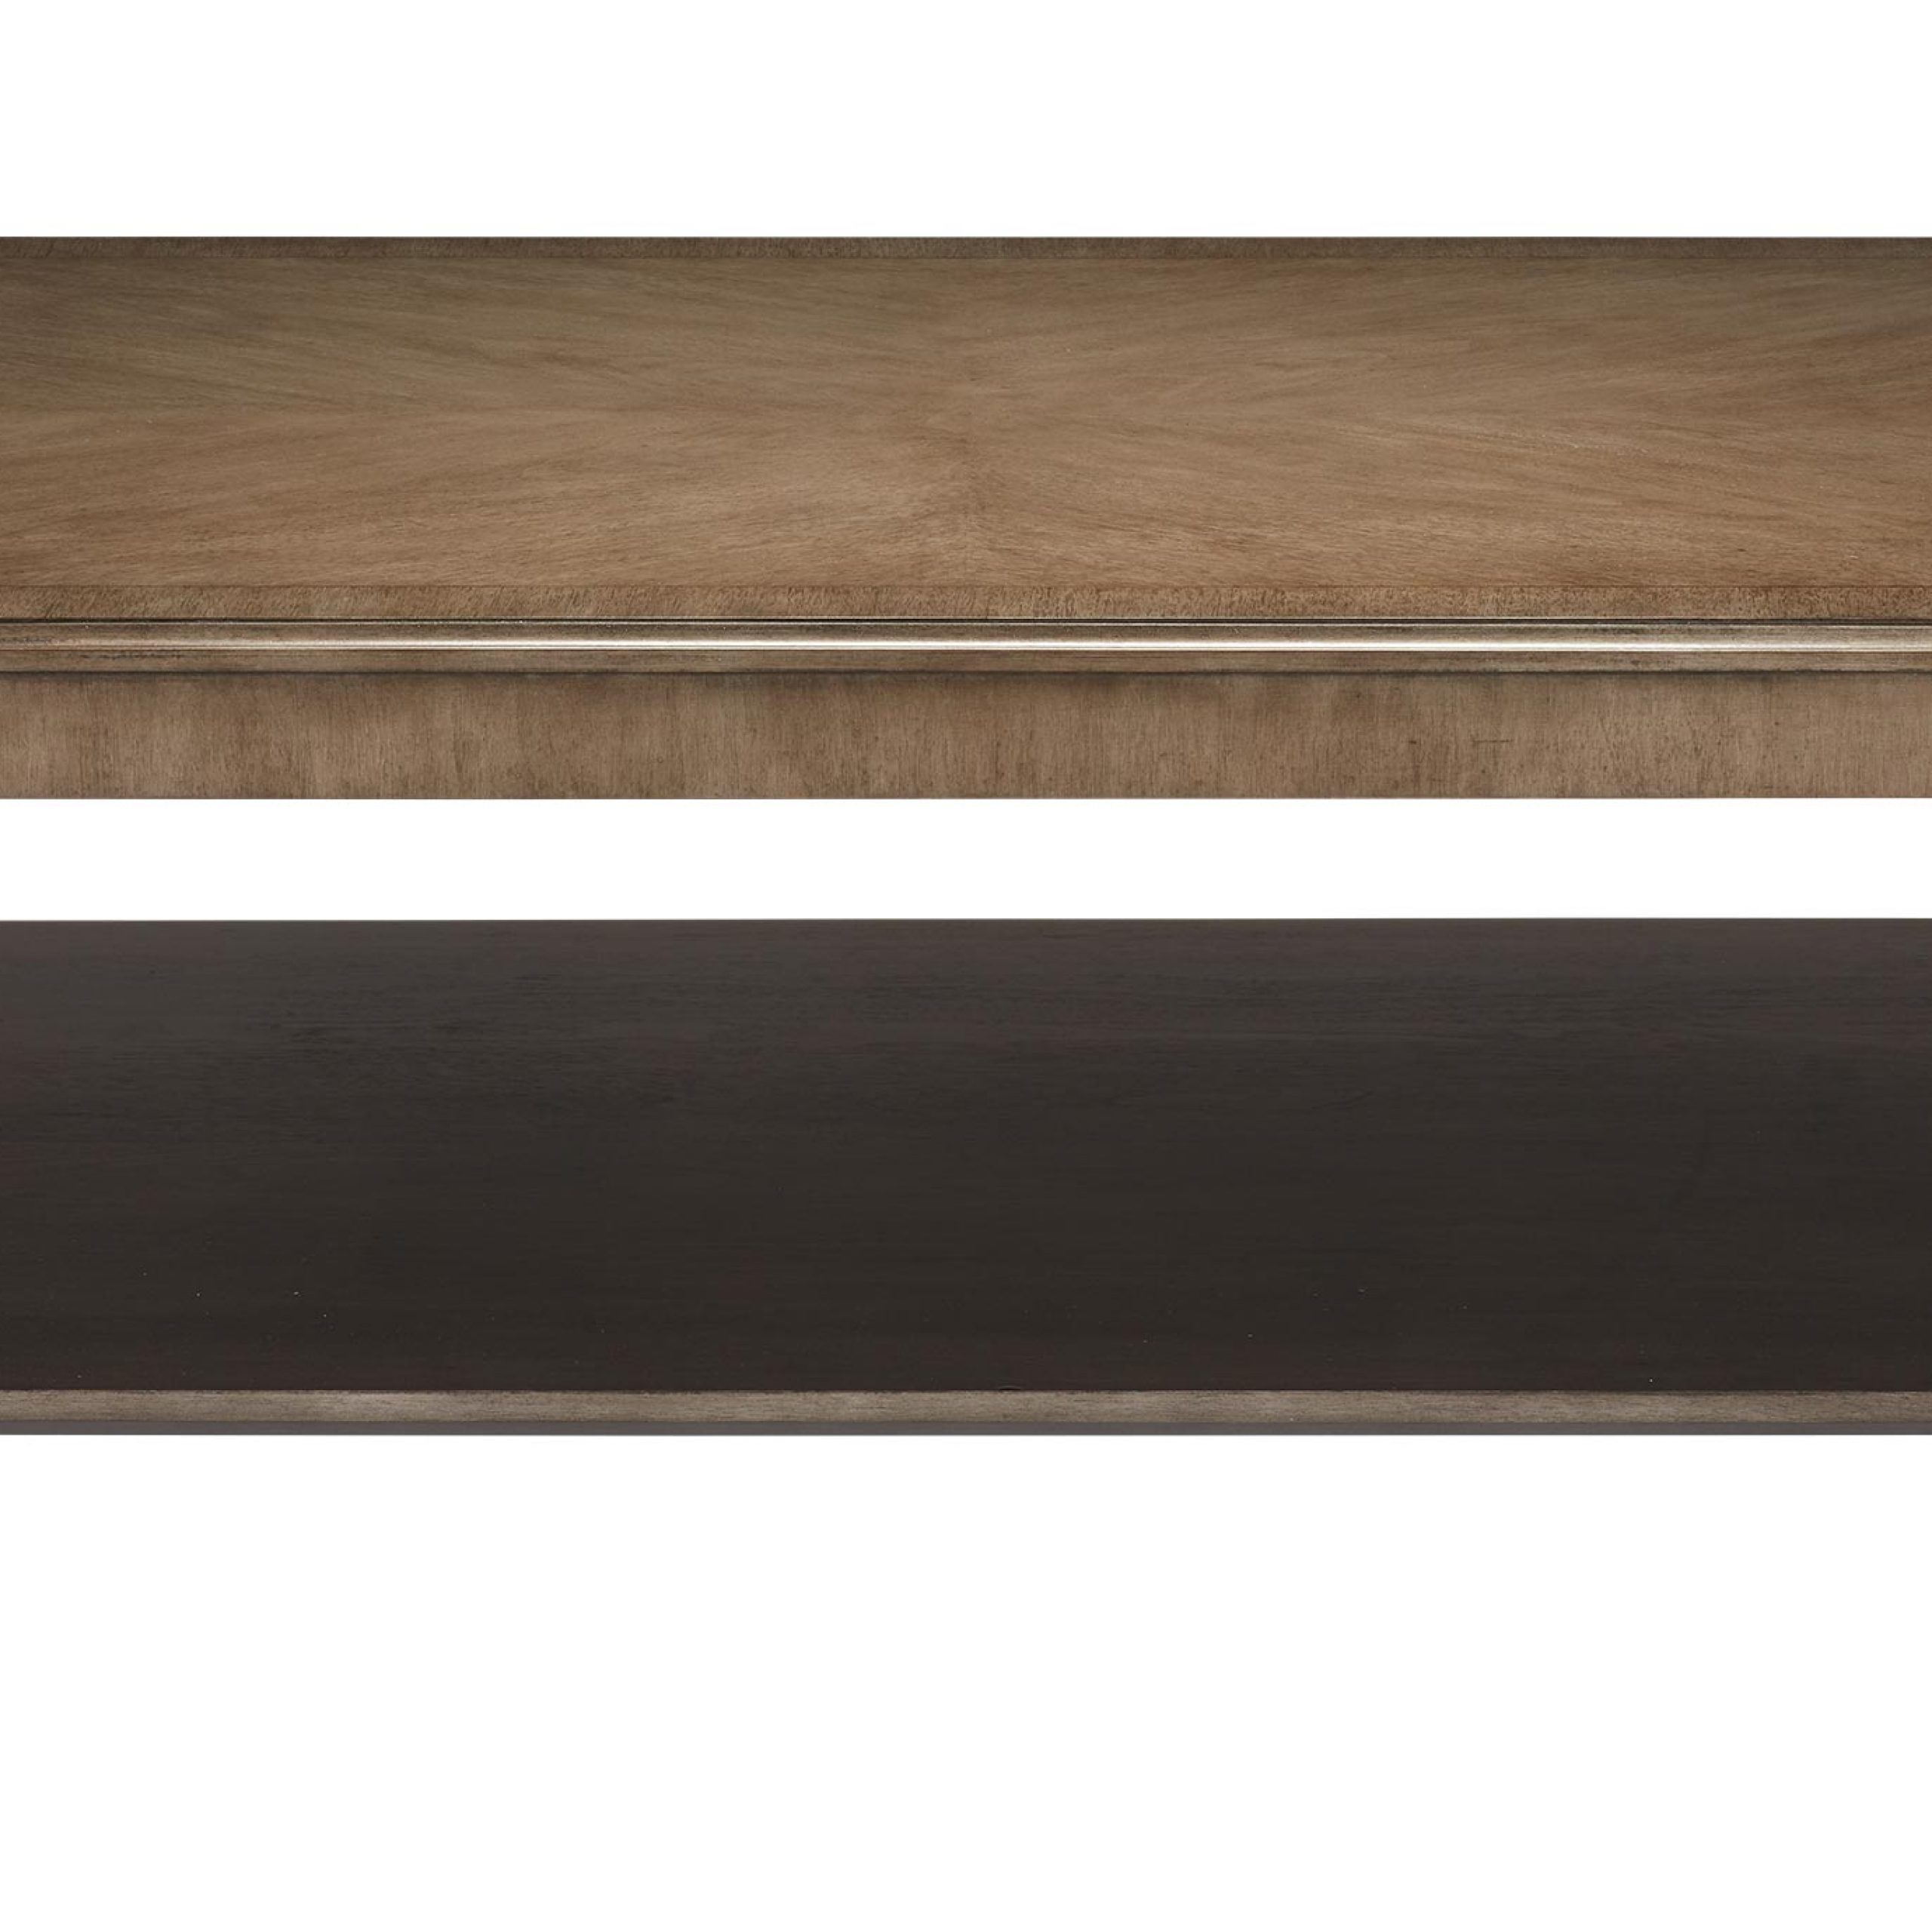 Elton Rectangular Coffee Table | Wood Coffee Table | Ethan Allen For Rectangle Coffee Tables (View 9 of 15)